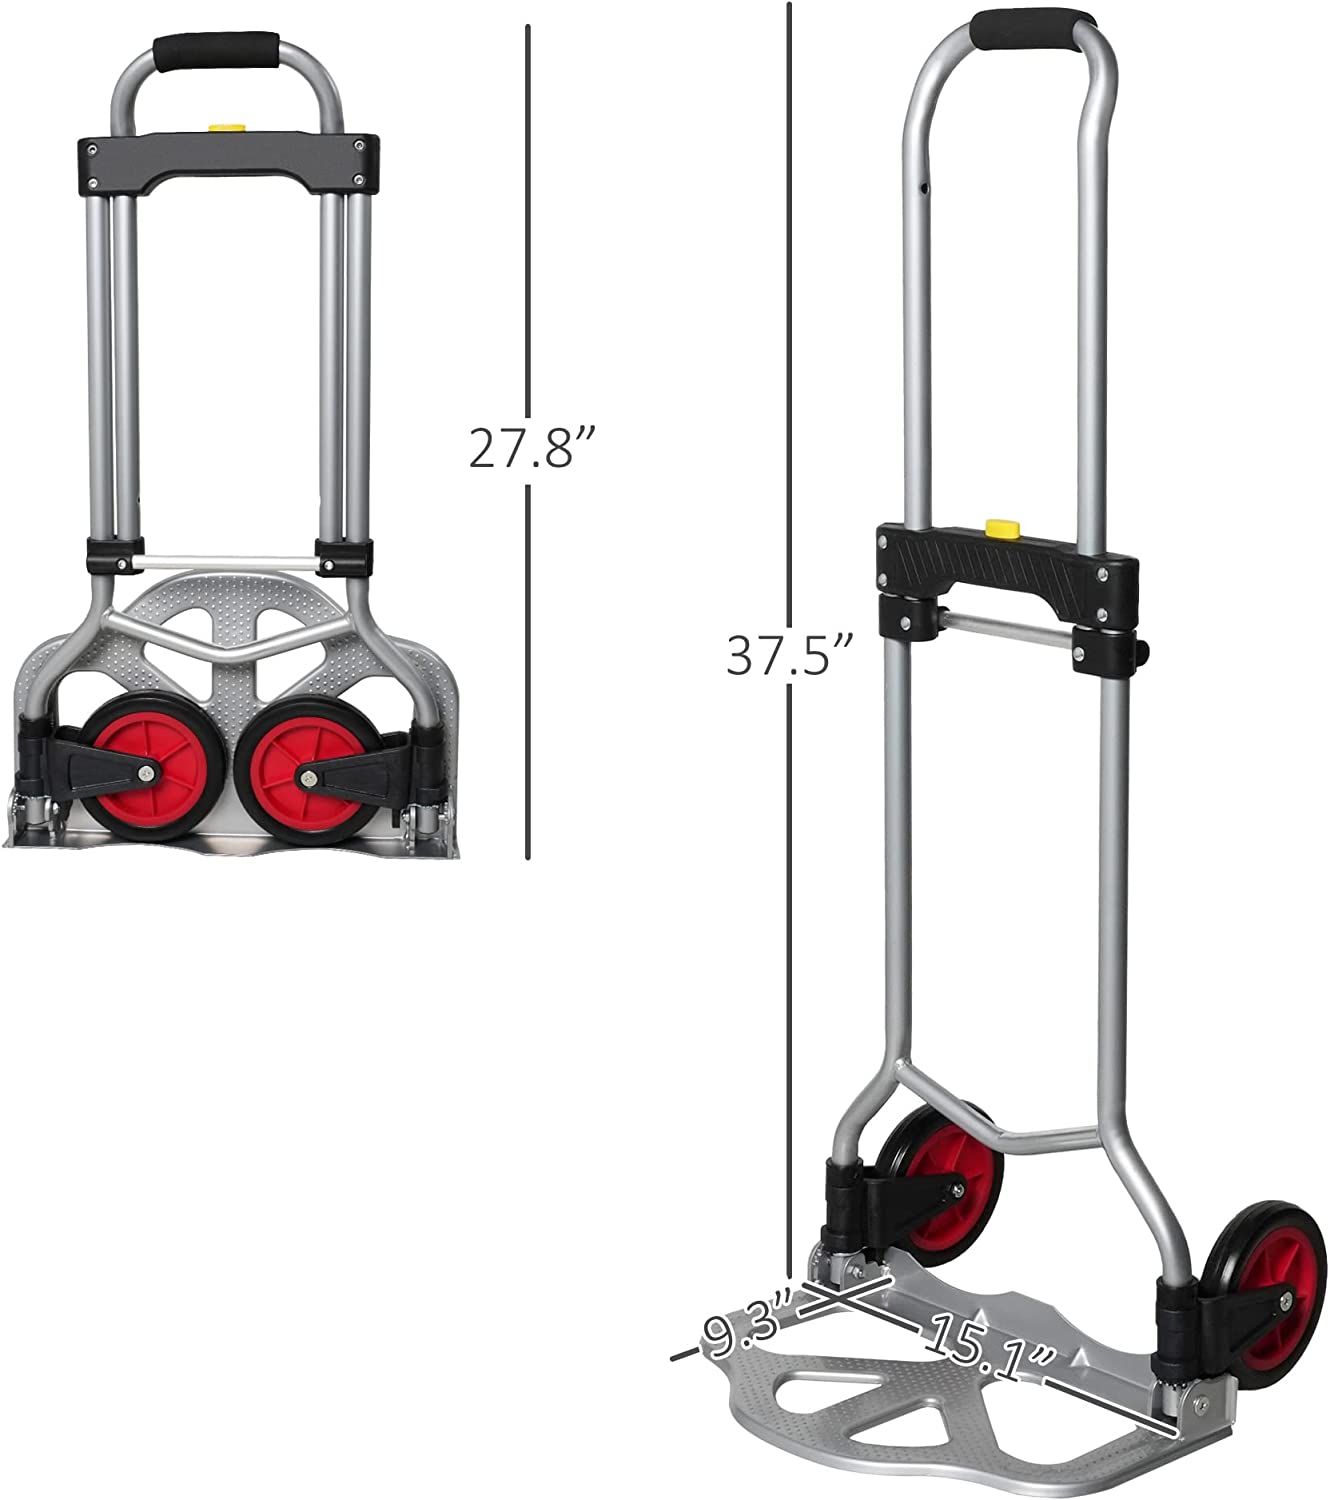 Aluminum Alloy Heavy Duty Hand Dolly Cart, Folding Hand Truck with 2 Wheel with Telescoping Handle